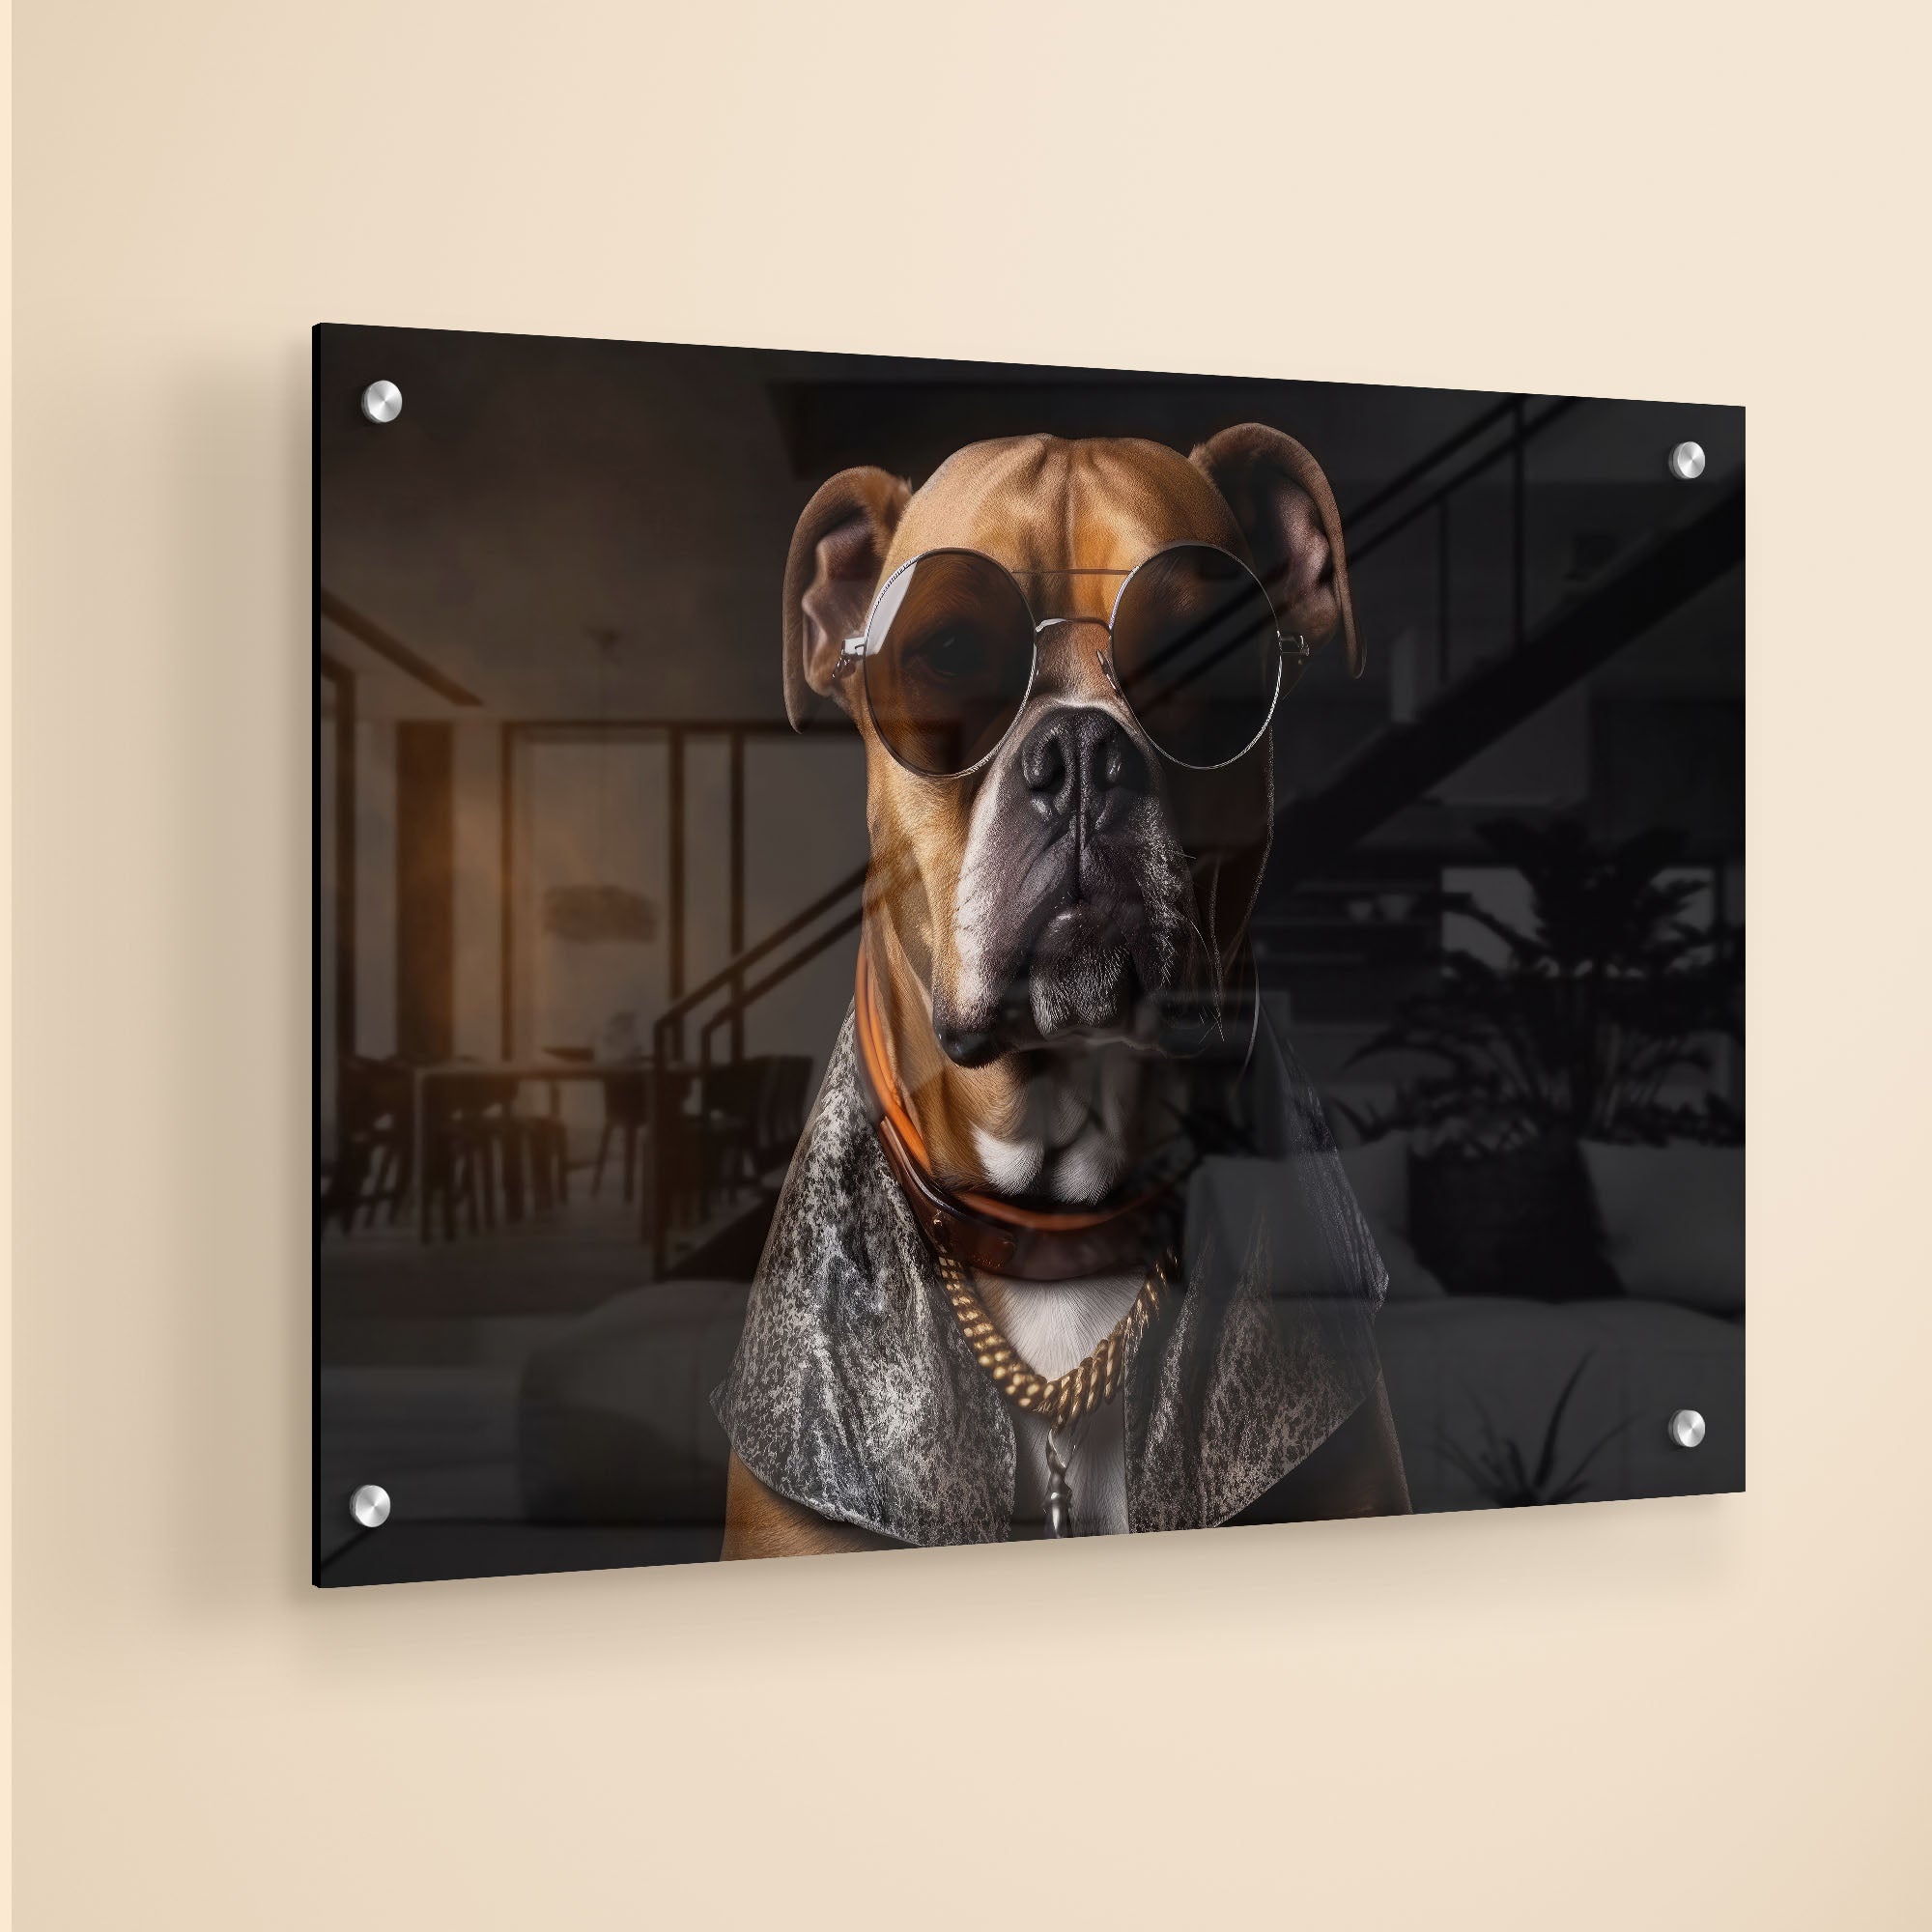 Gangster Boxer dog Acrylic Wall Painting